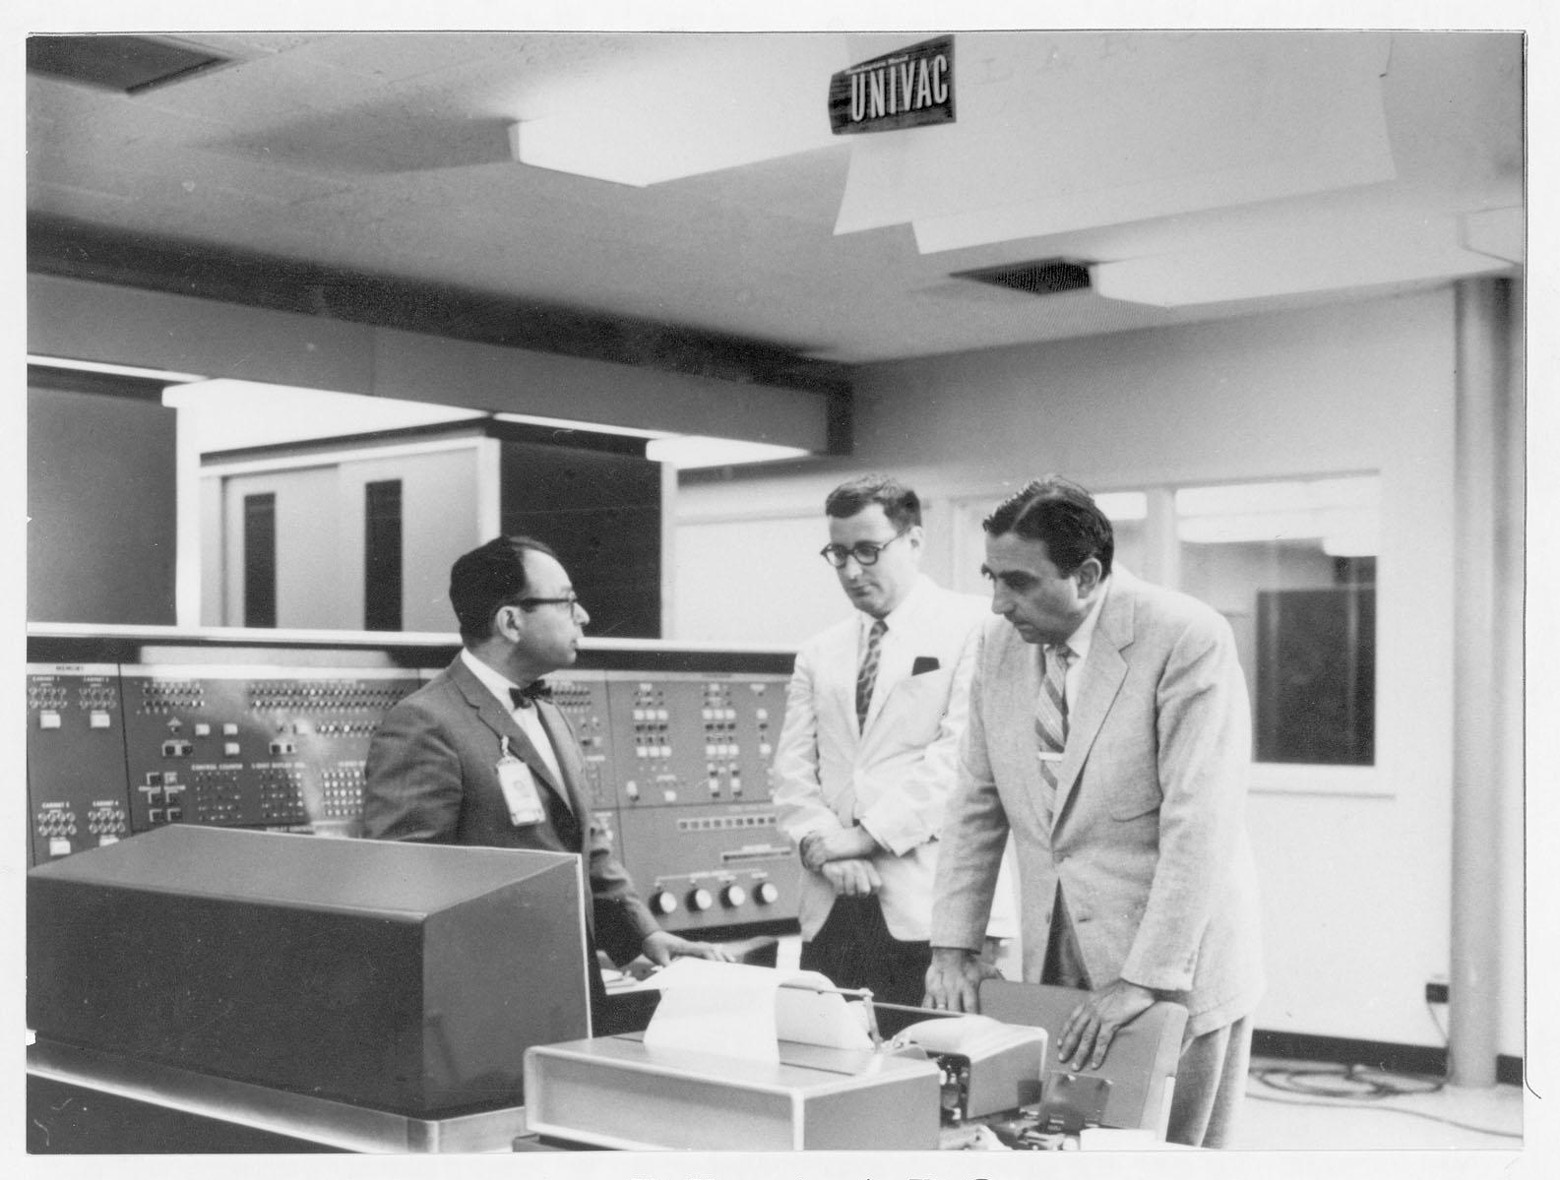 Black and white archival photo of the three men standing in discussion in front of a computer control panel with knobs and switches.